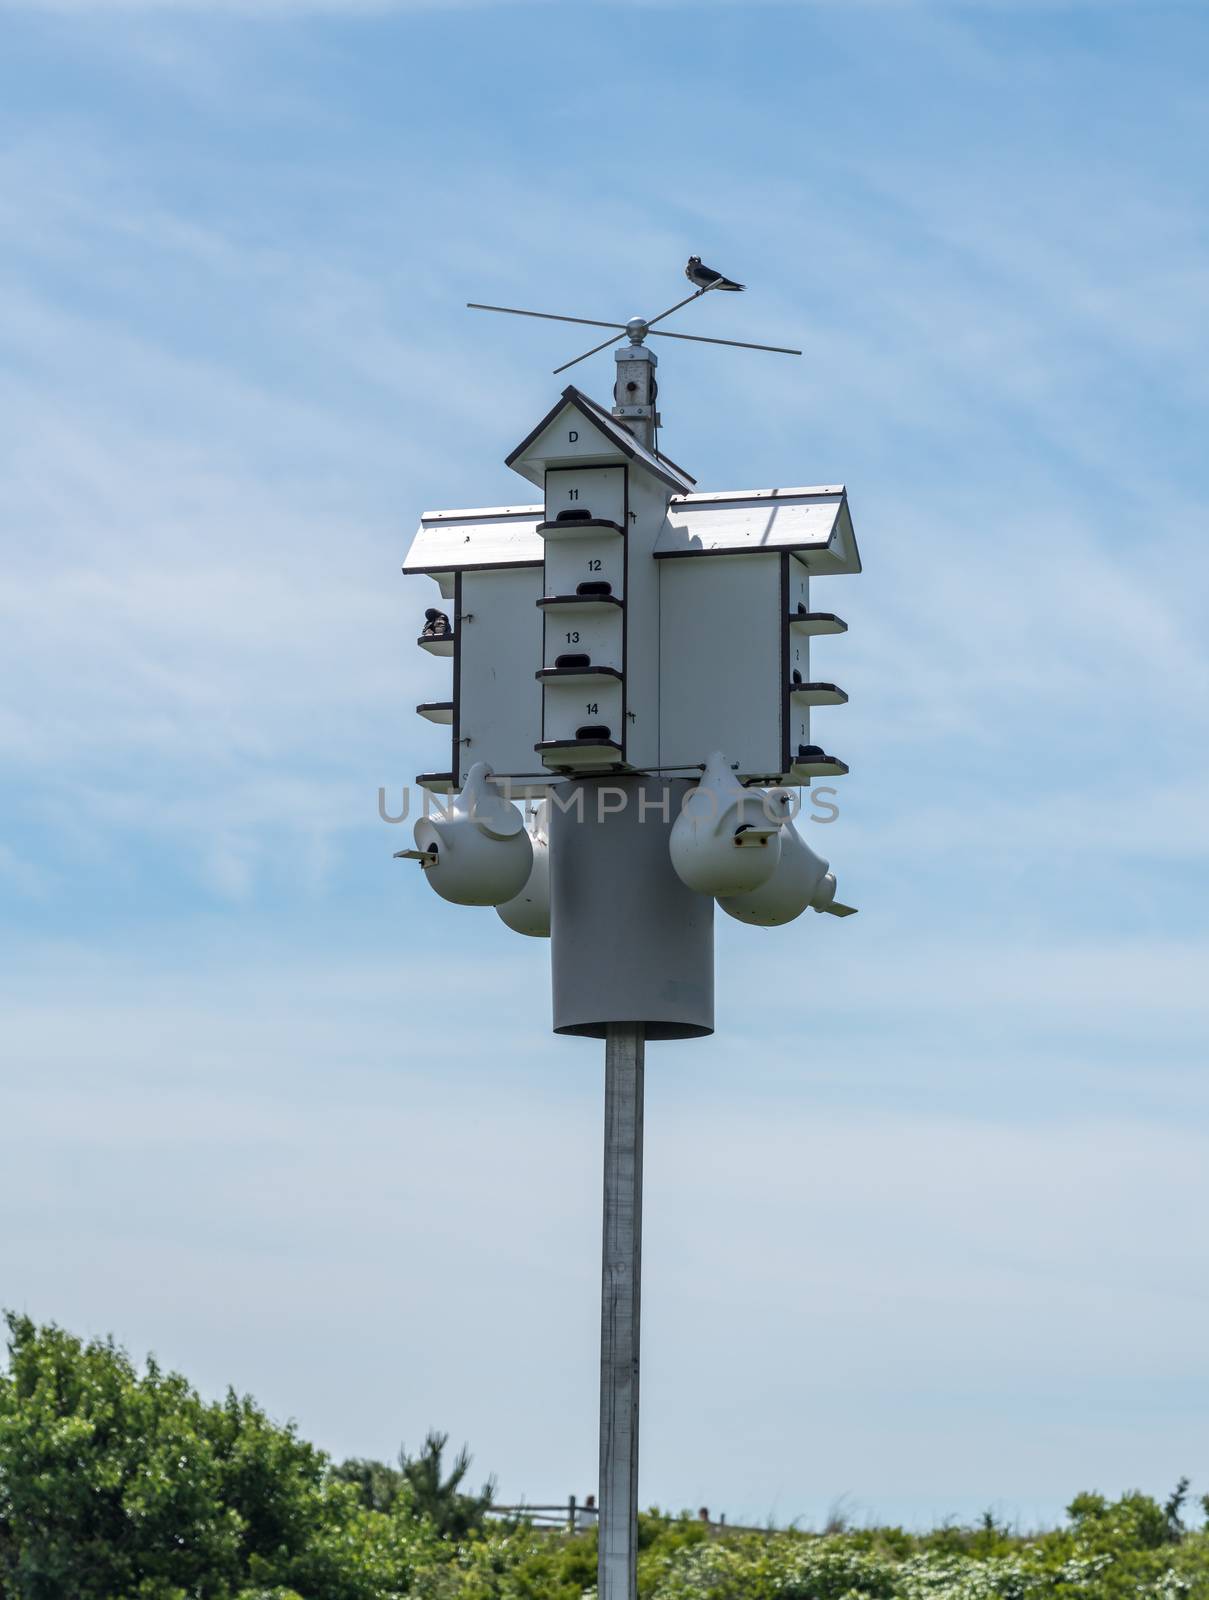 Multiple occupancy bird house or condo in state park by steheap